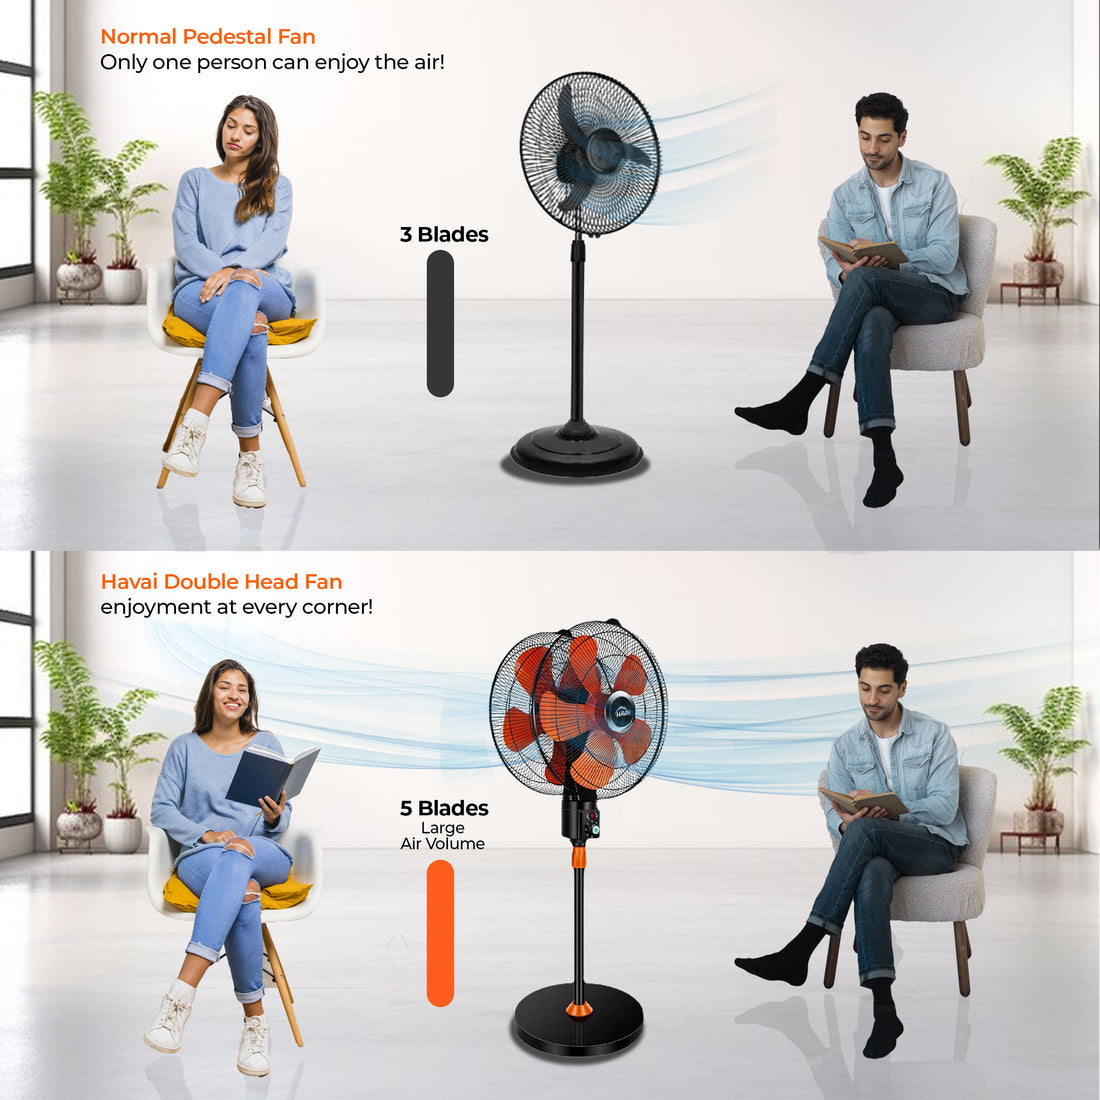 HAVAI DOUBLE HEAD 360 DEGREE FAN |18 INCH|REMOTE CONTROL, DOUBLE HEADED, 360 Degree Coverage, Pedestal | 1 Year Warranty | 3 SPEED CONTROL | ORANGE AND BLACK